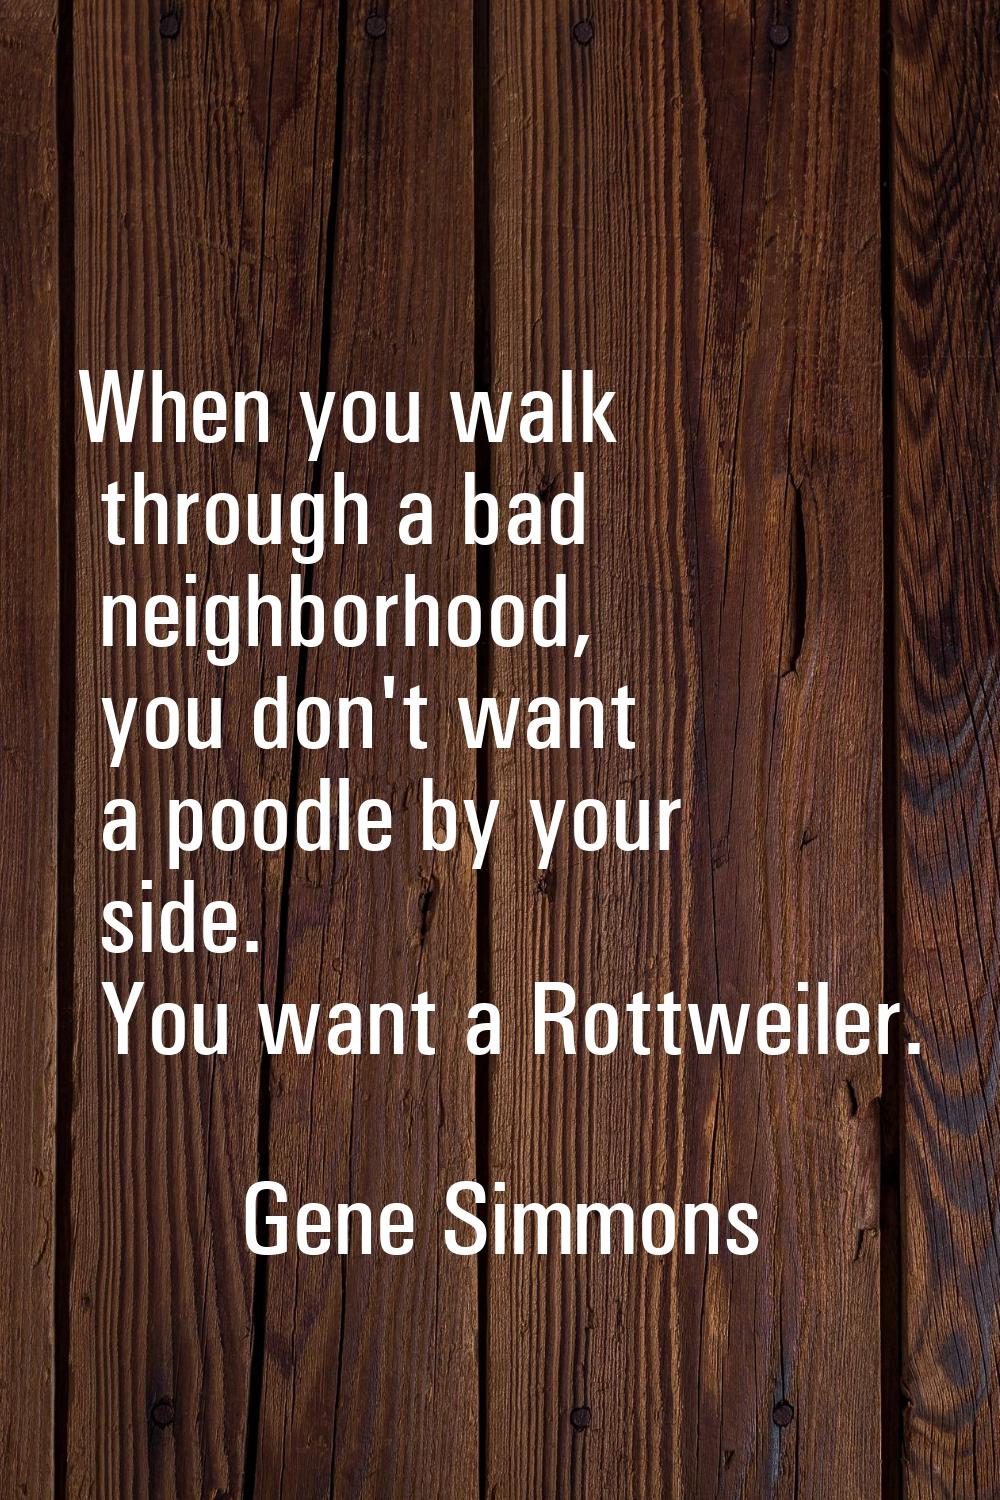 When you walk through a bad neighborhood, you don't want a poodle by your side. You want a Rottweil